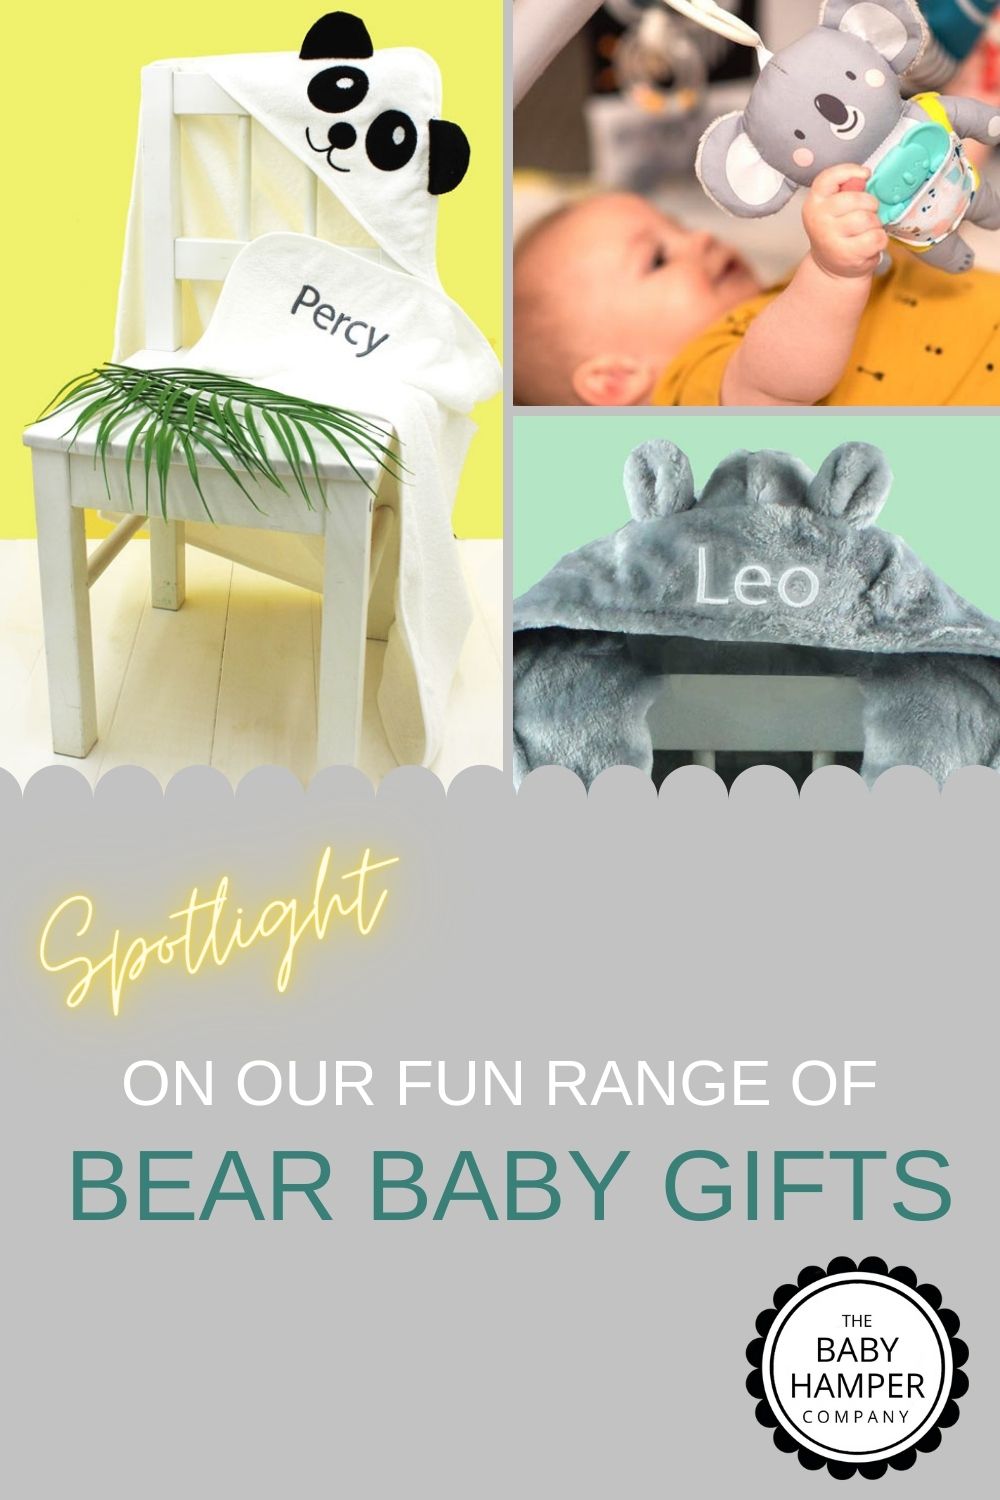 Spotlight on our Fun Range of Bear Baby Gifts